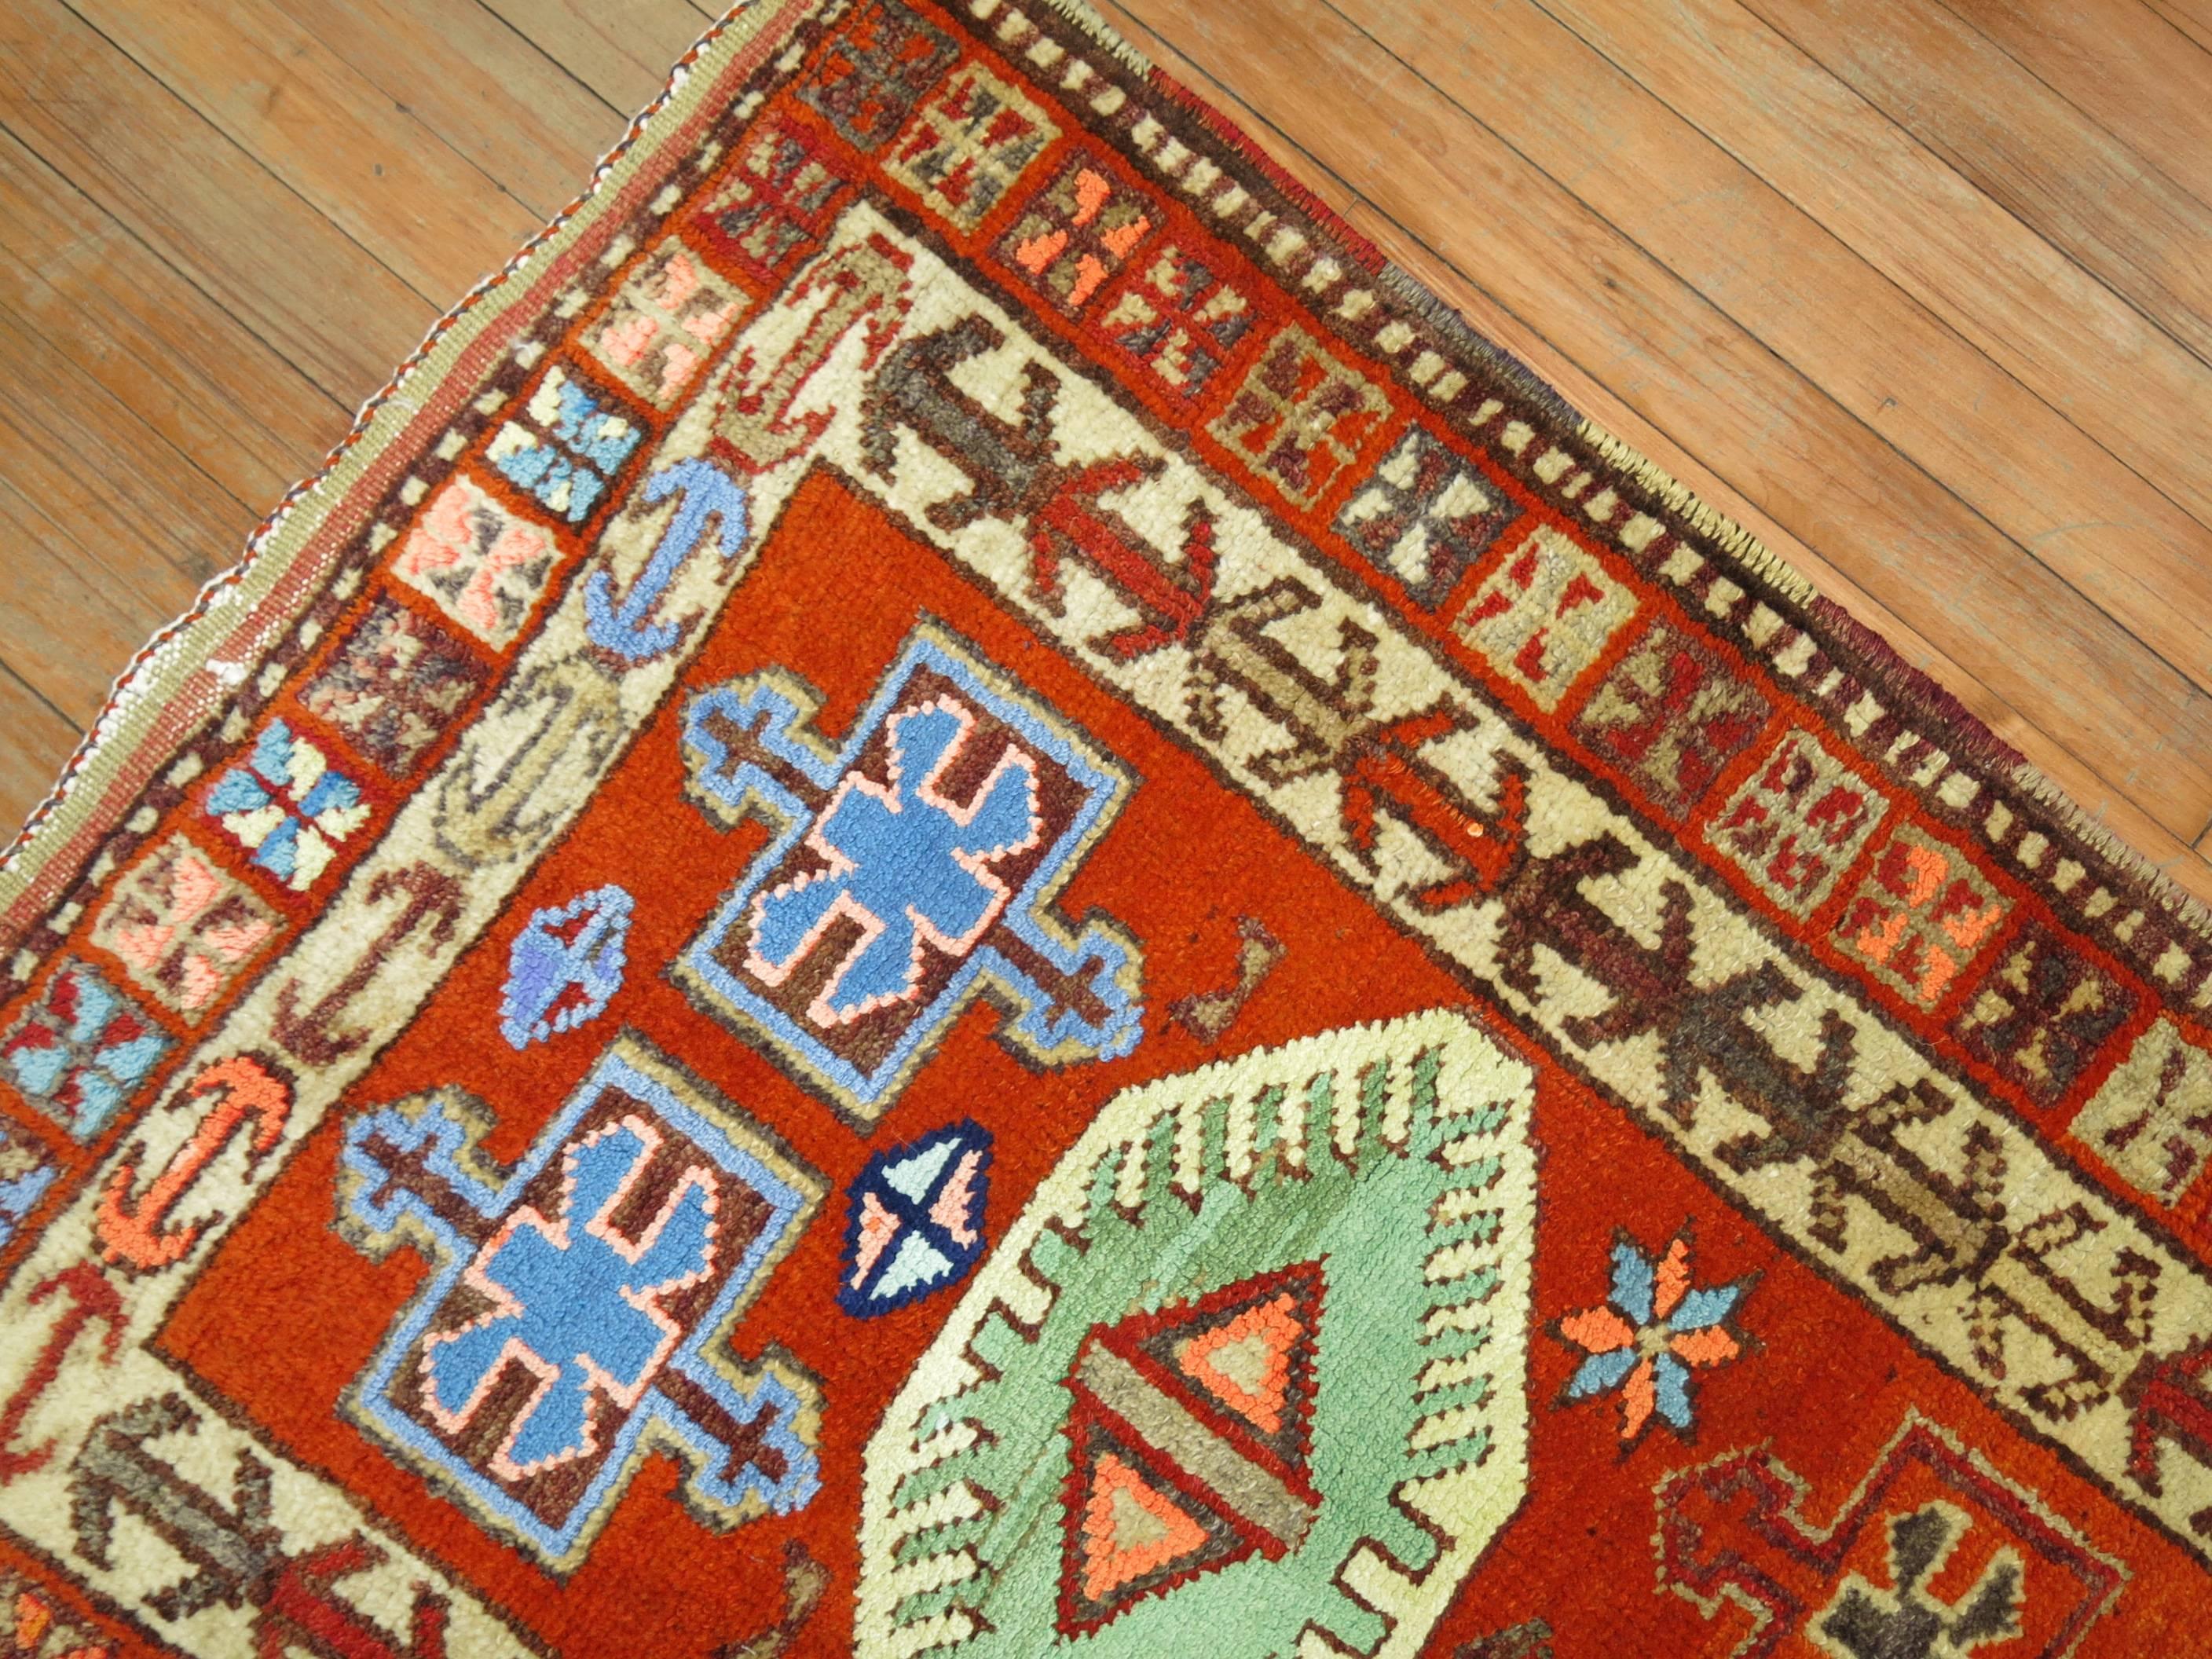 A colorful full pile vintage Turkish runner from the mid-20th century.

2'9'' x 12'6''